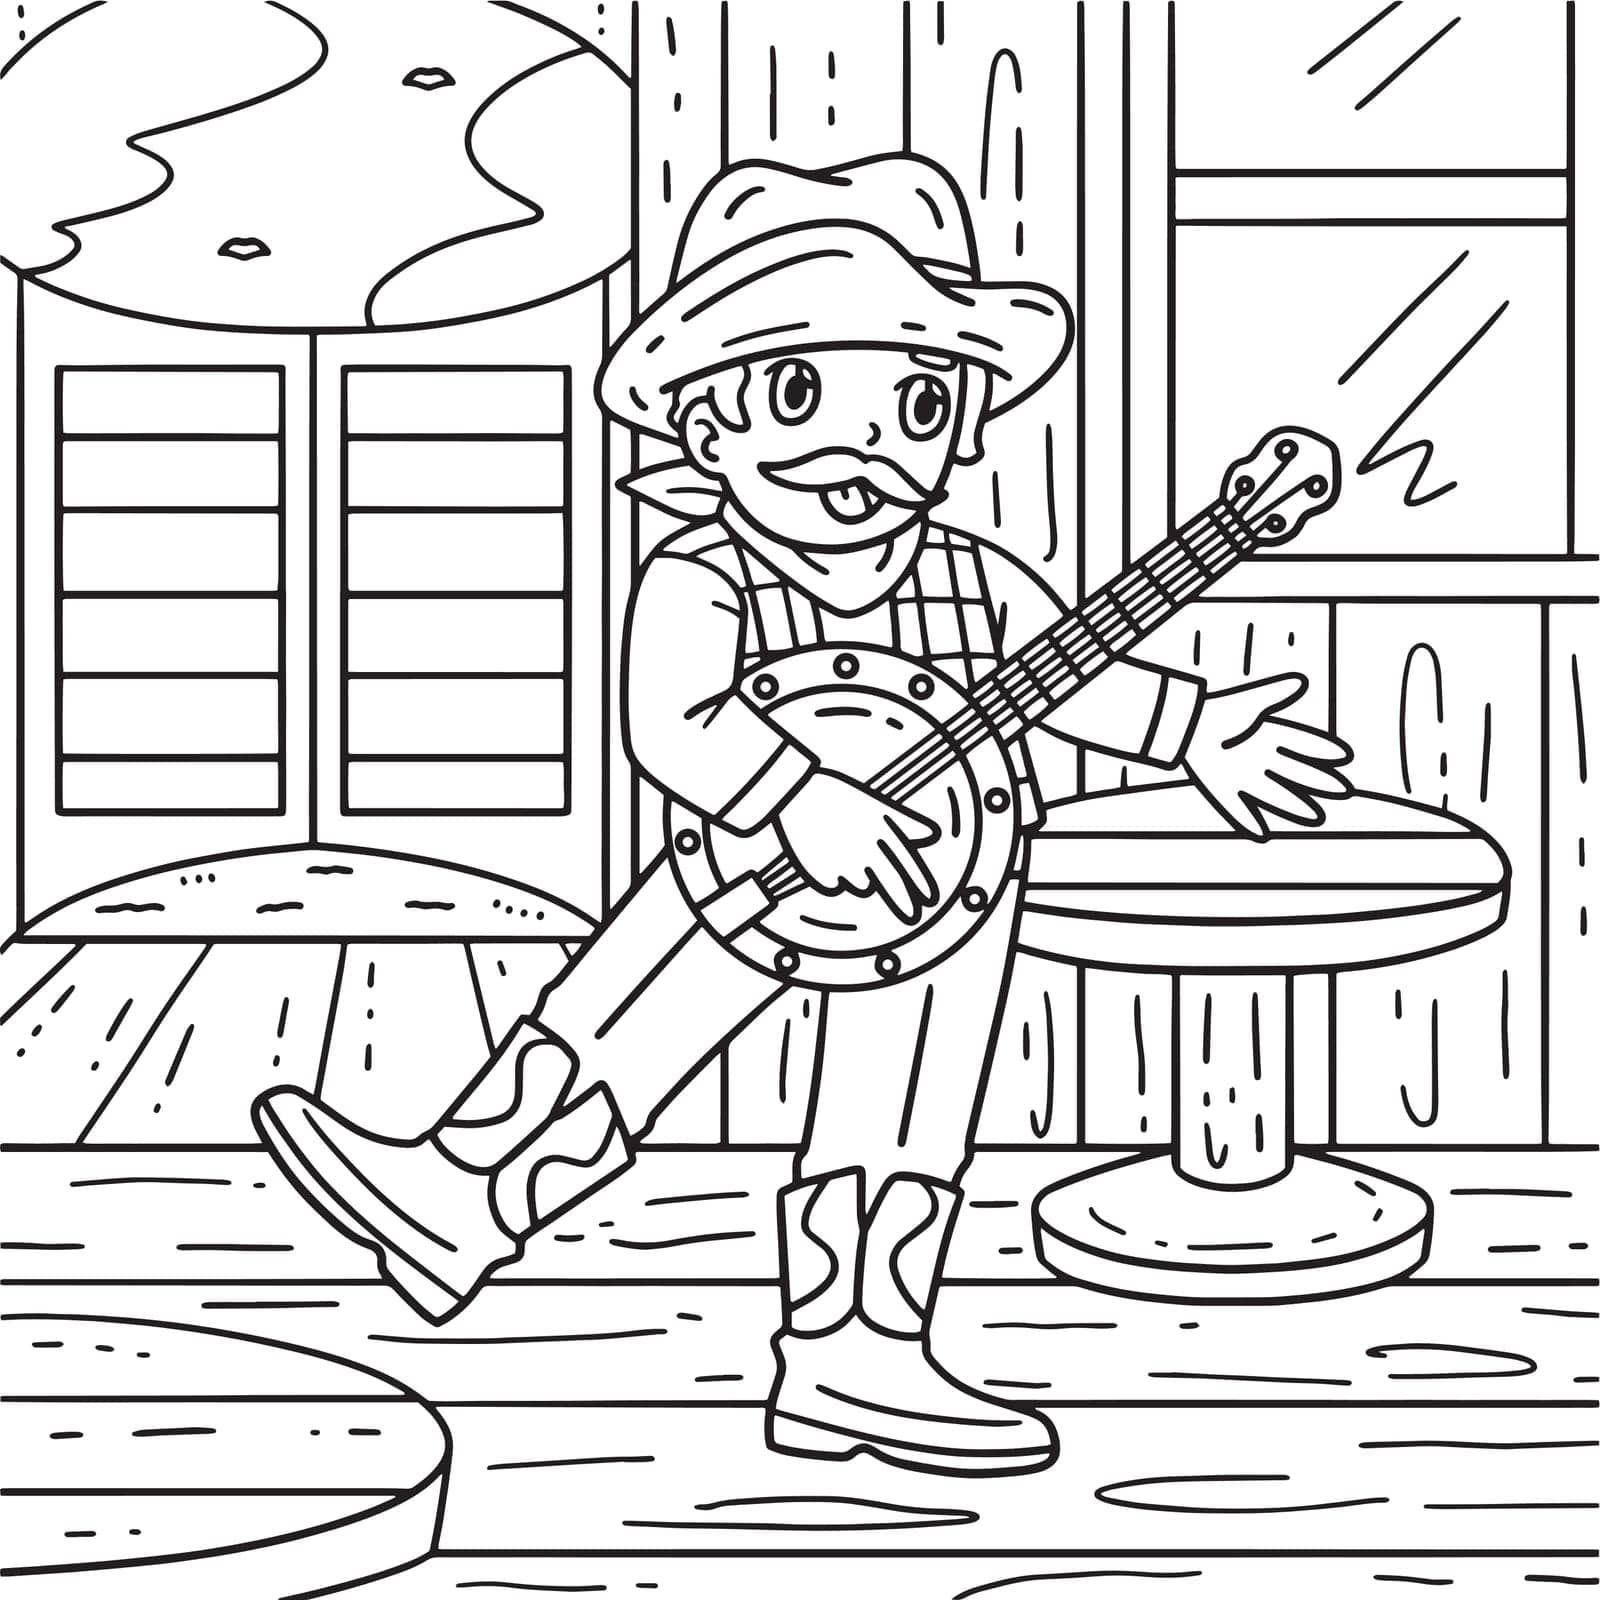 A cute and funny coloring page of a Cowboy Playing Banjo. Provides hours of coloring fun for children. To color, this page is very easy. Suitable for little kids and toddlers.